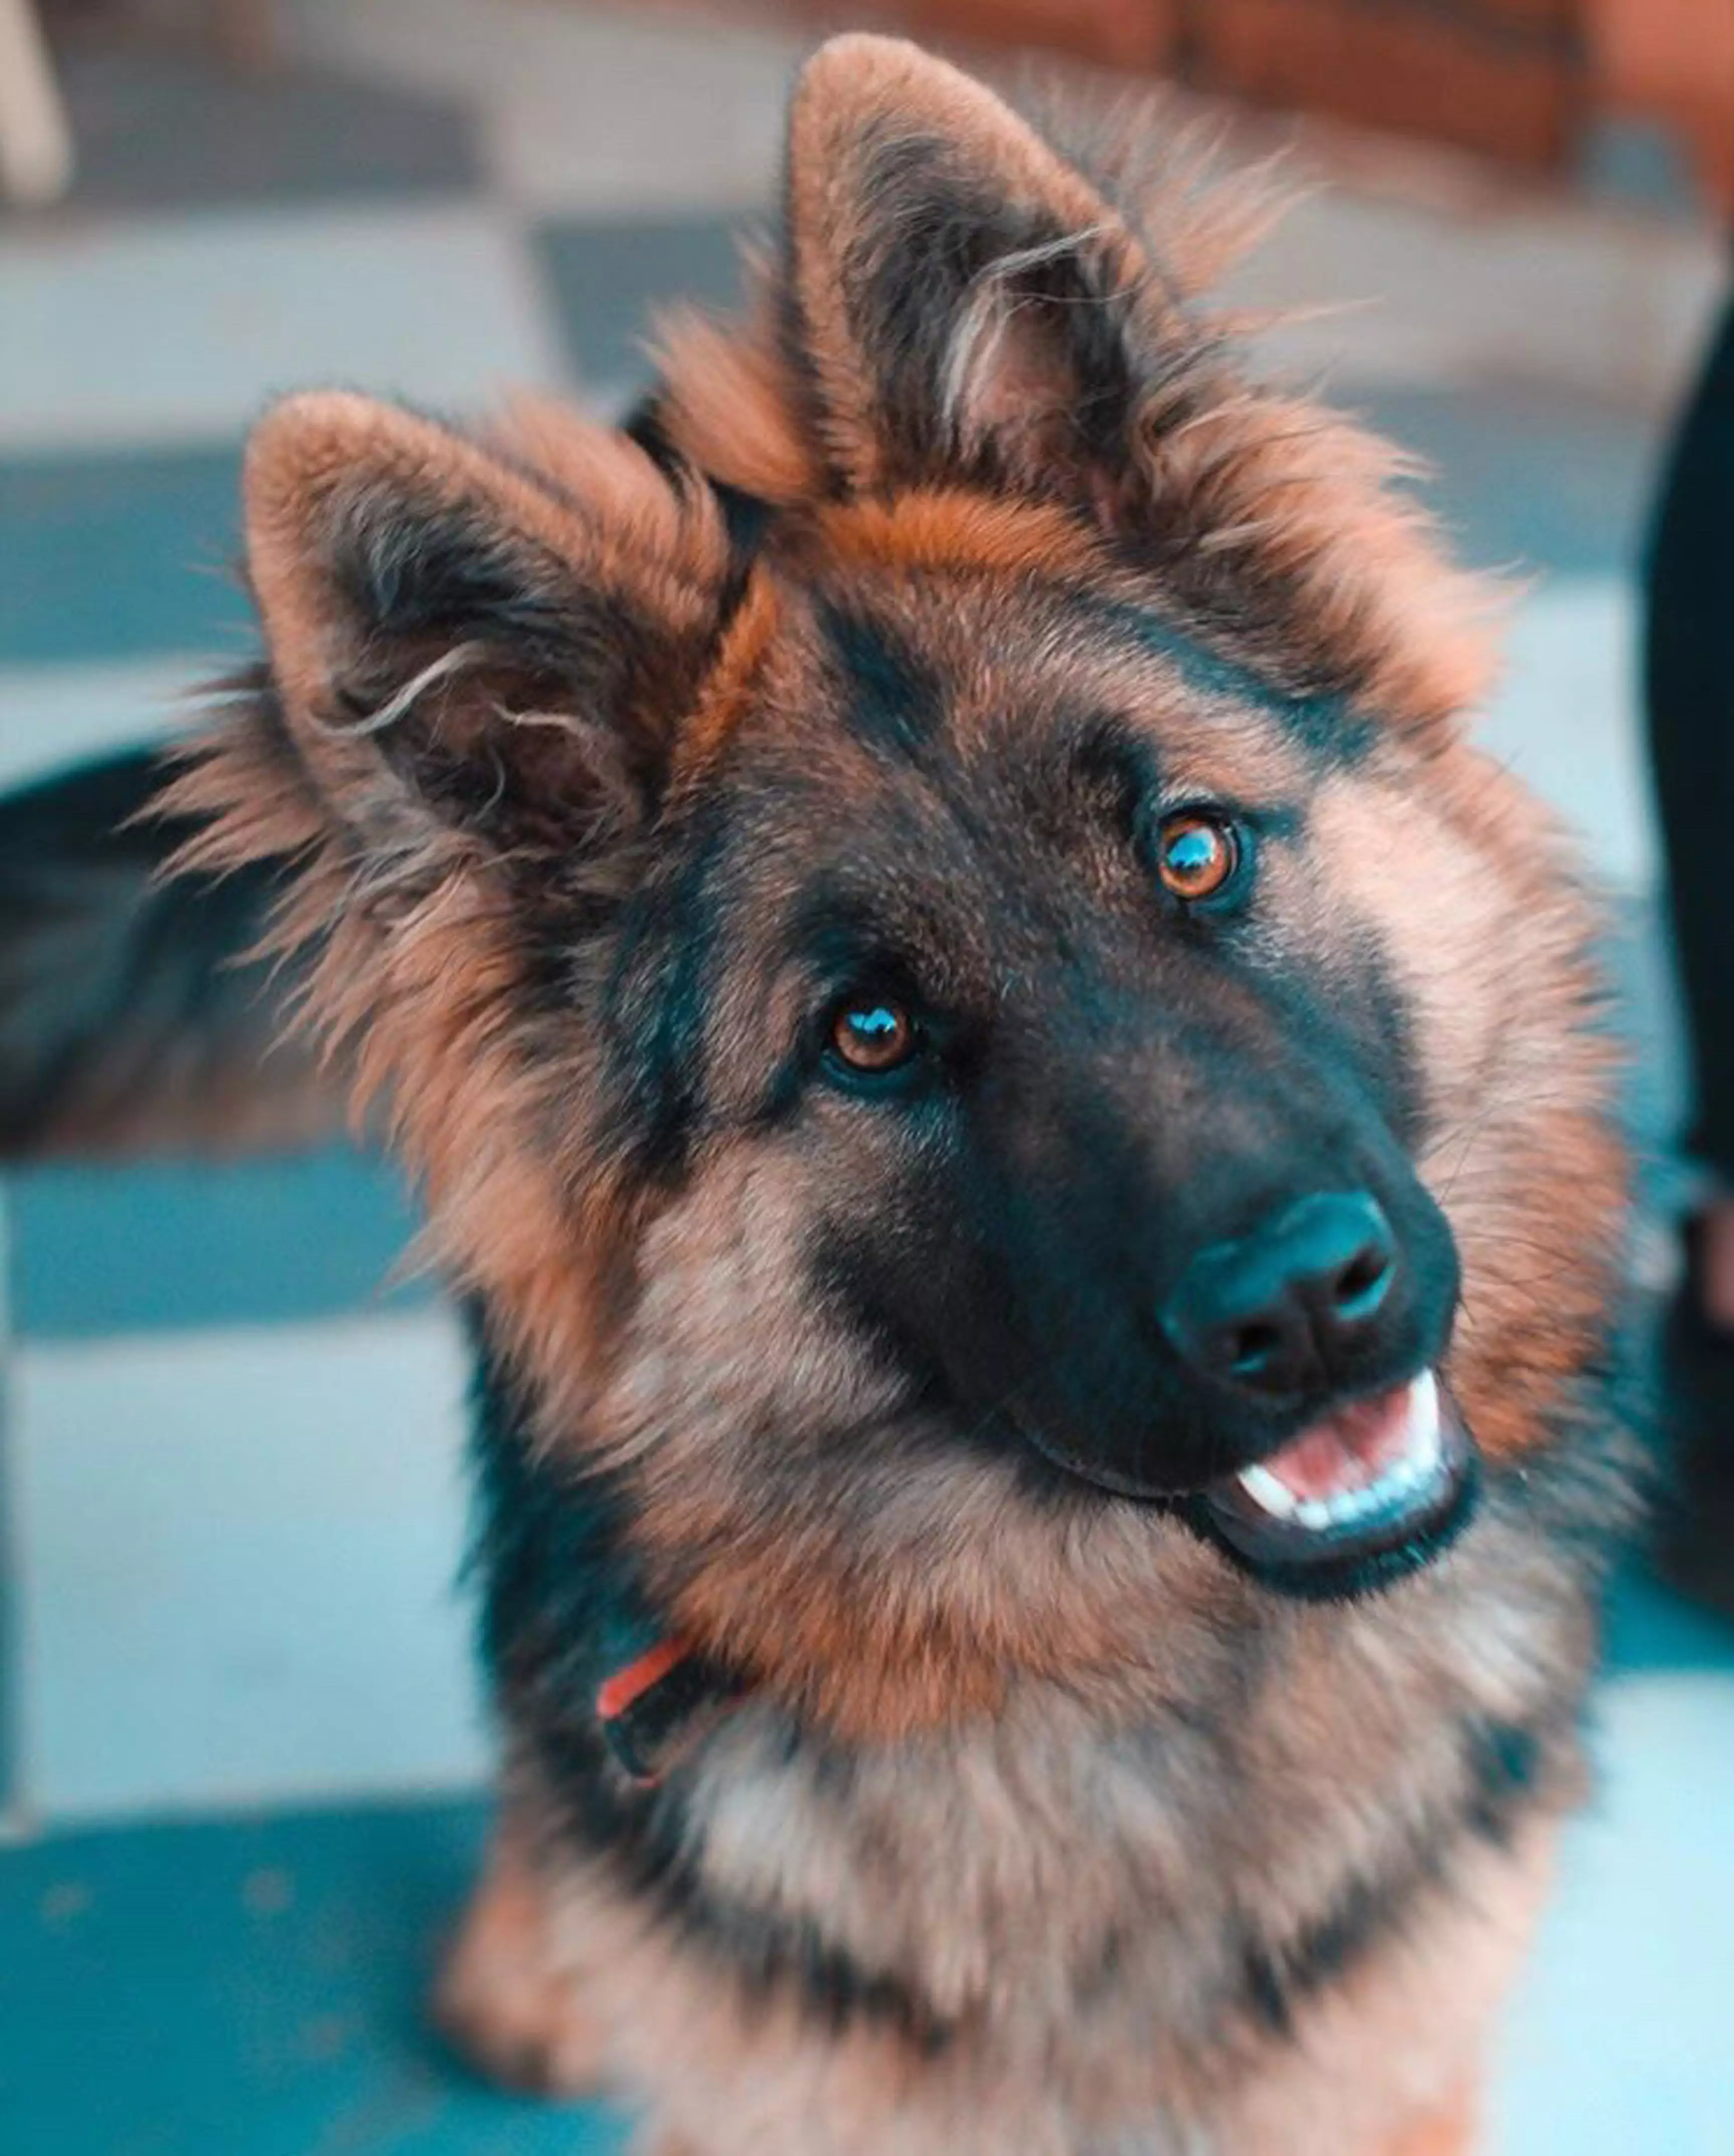 The German Shepherd breed was found to be less aggressive than smaller dogs (